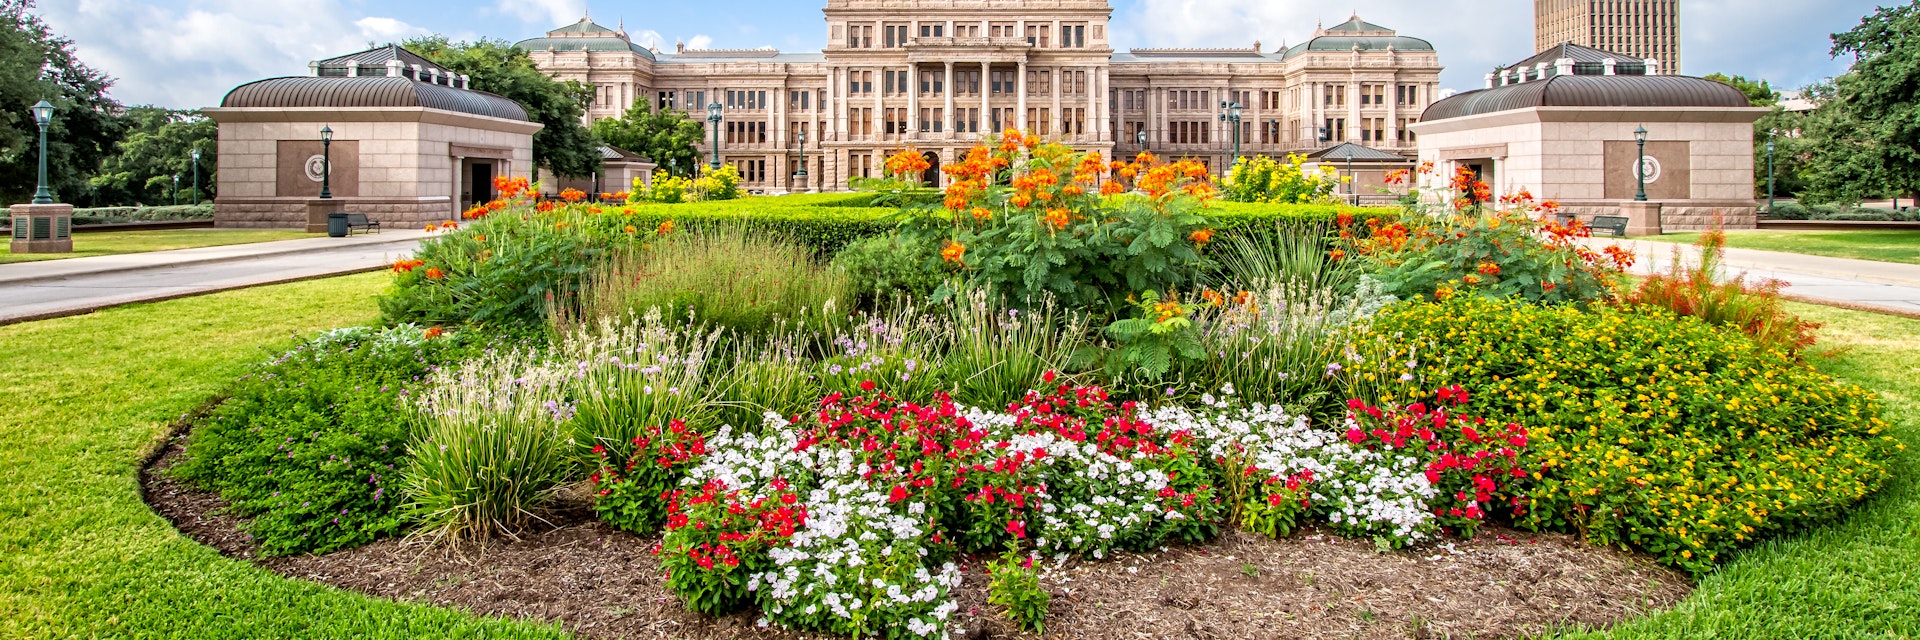 The Texas State Capitol with flower garden. It was completed in 1888 in Downtown Austin. It contains the offices and chambers of the Texas Legislature and the Office of the Governor.